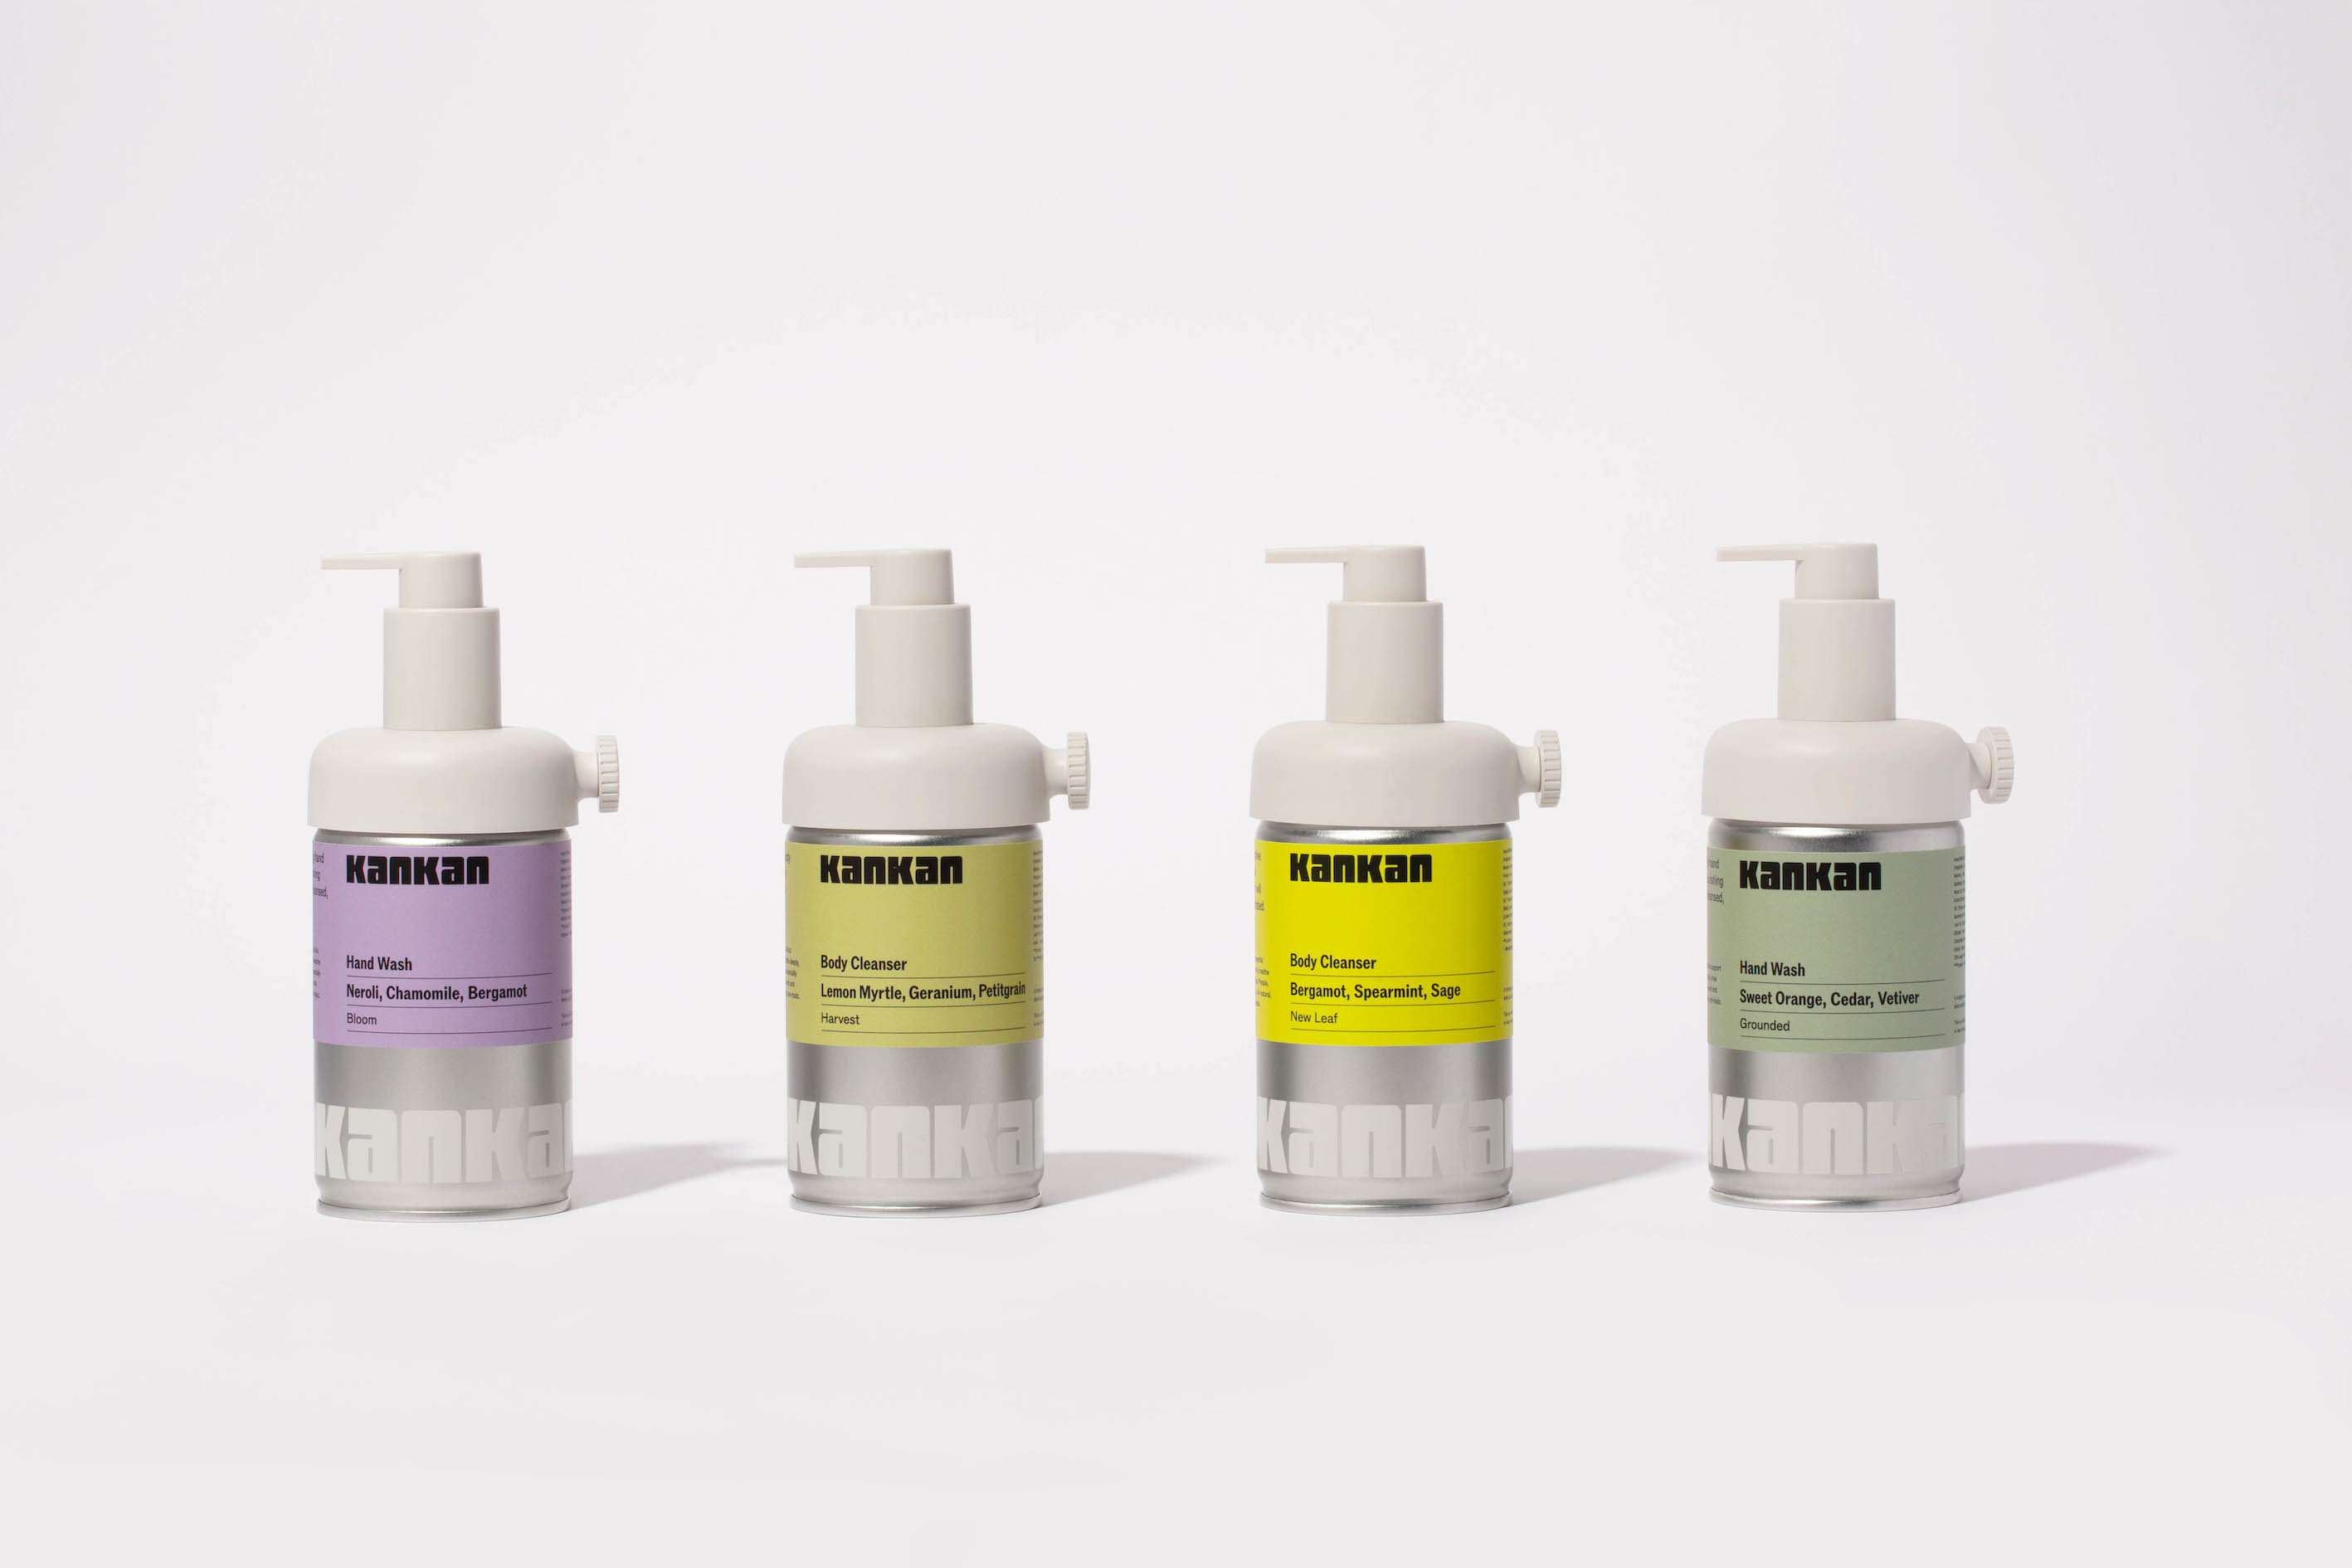 Kankan and Morrama Launch a Refillable Dispenser Range for Canned Body Care